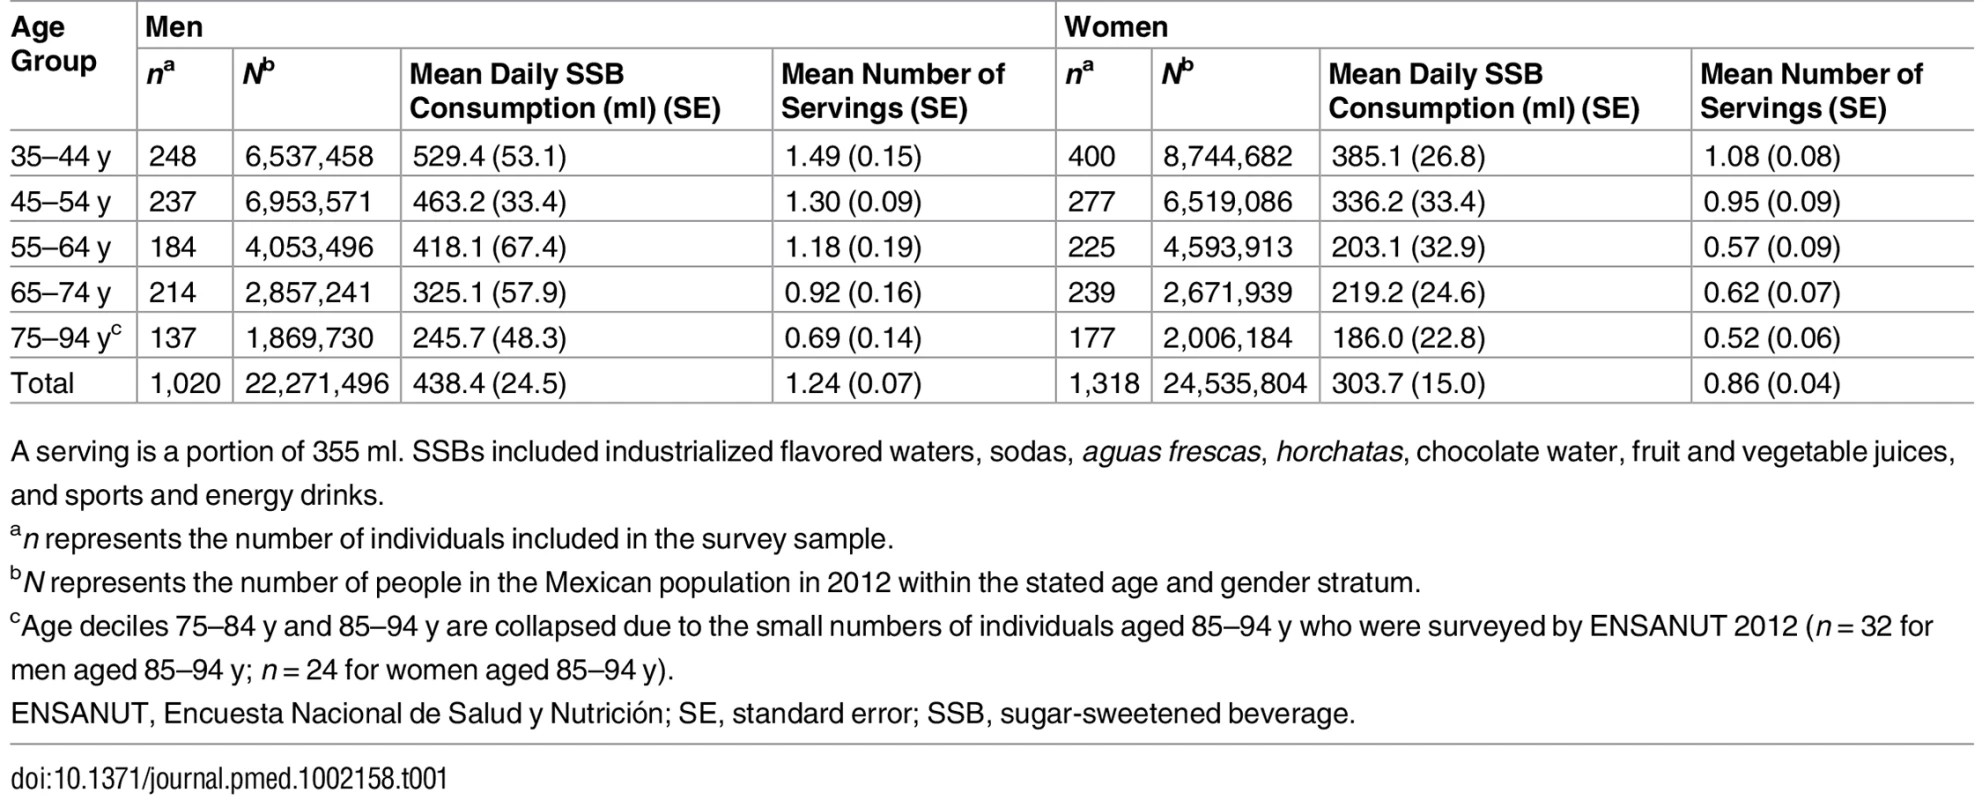 Mean total volume and number of servings of sugar sweetened beverages consumed per person per day among Mexican adults from the 2012 Mexican National Health and Nutrition Survey (ENSANUT).